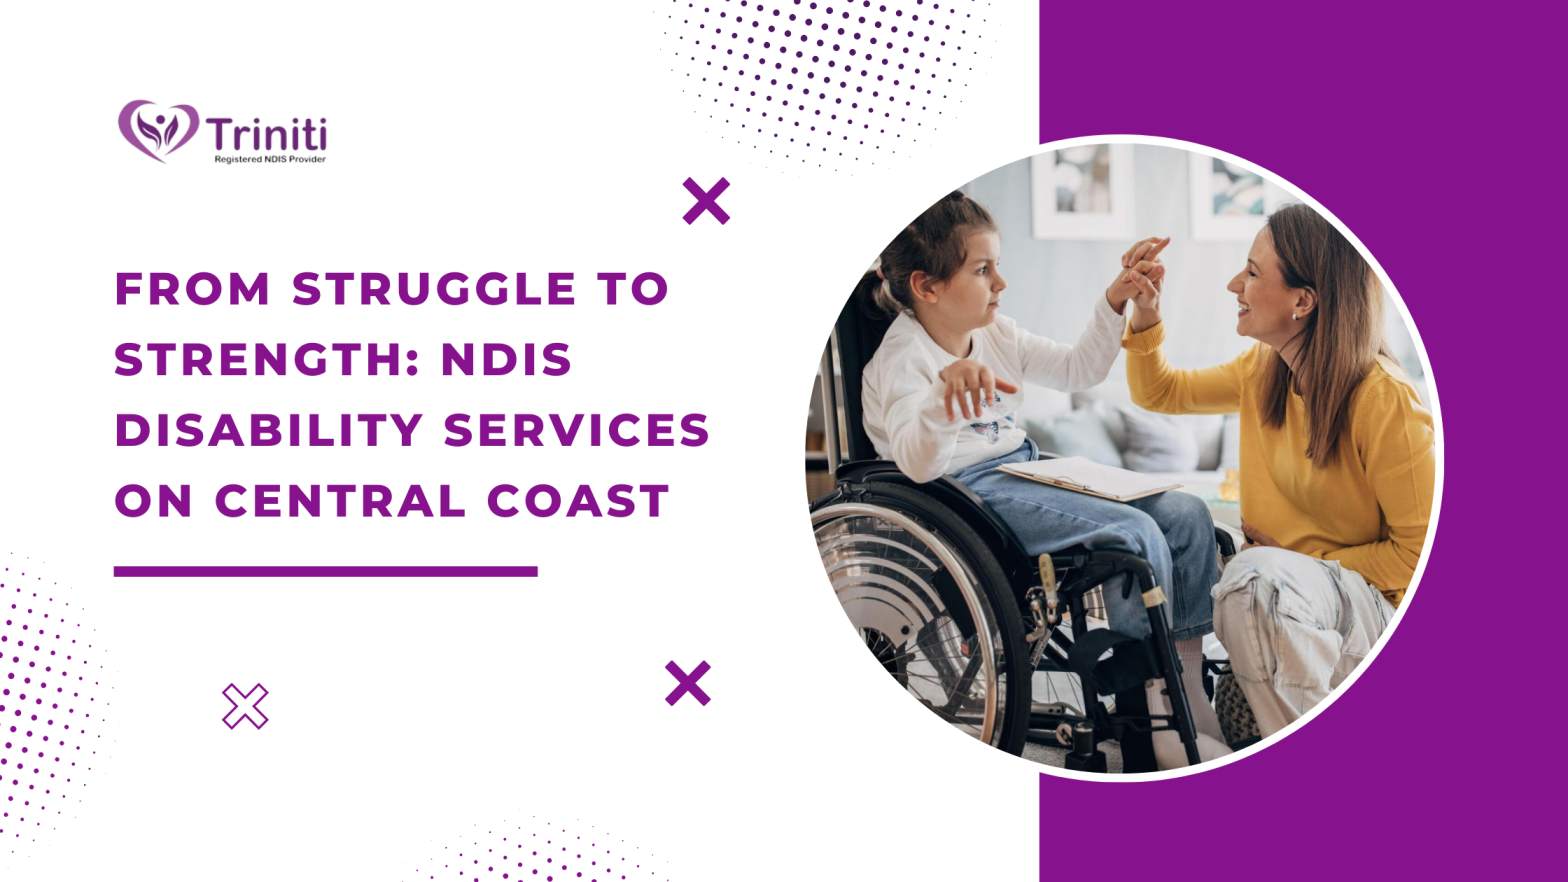 From Struggle to Strength: NDIS Disability Services on Central Coast